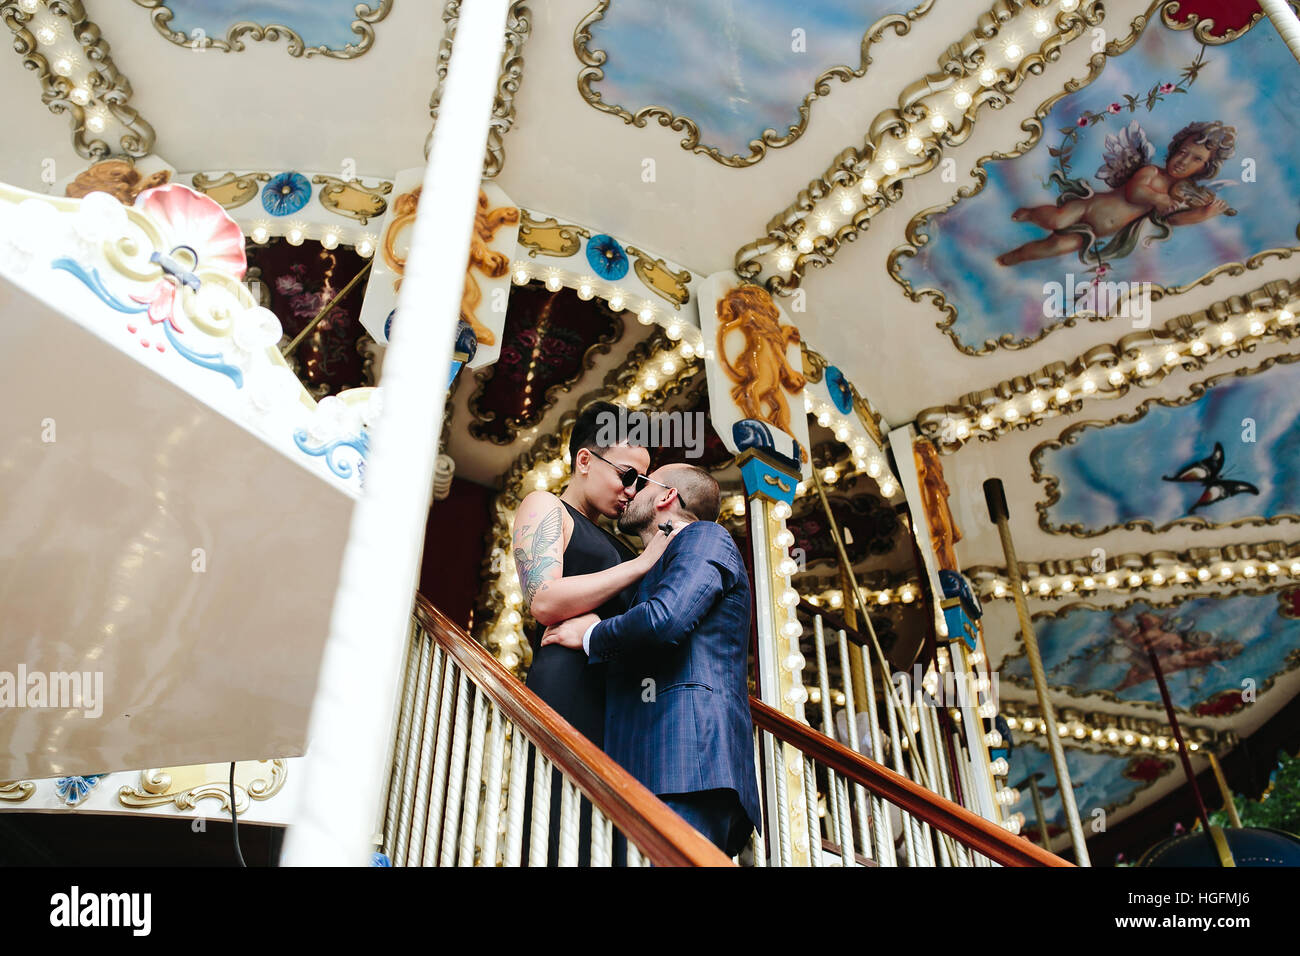 adult man and woman on a carousel Stock Photo